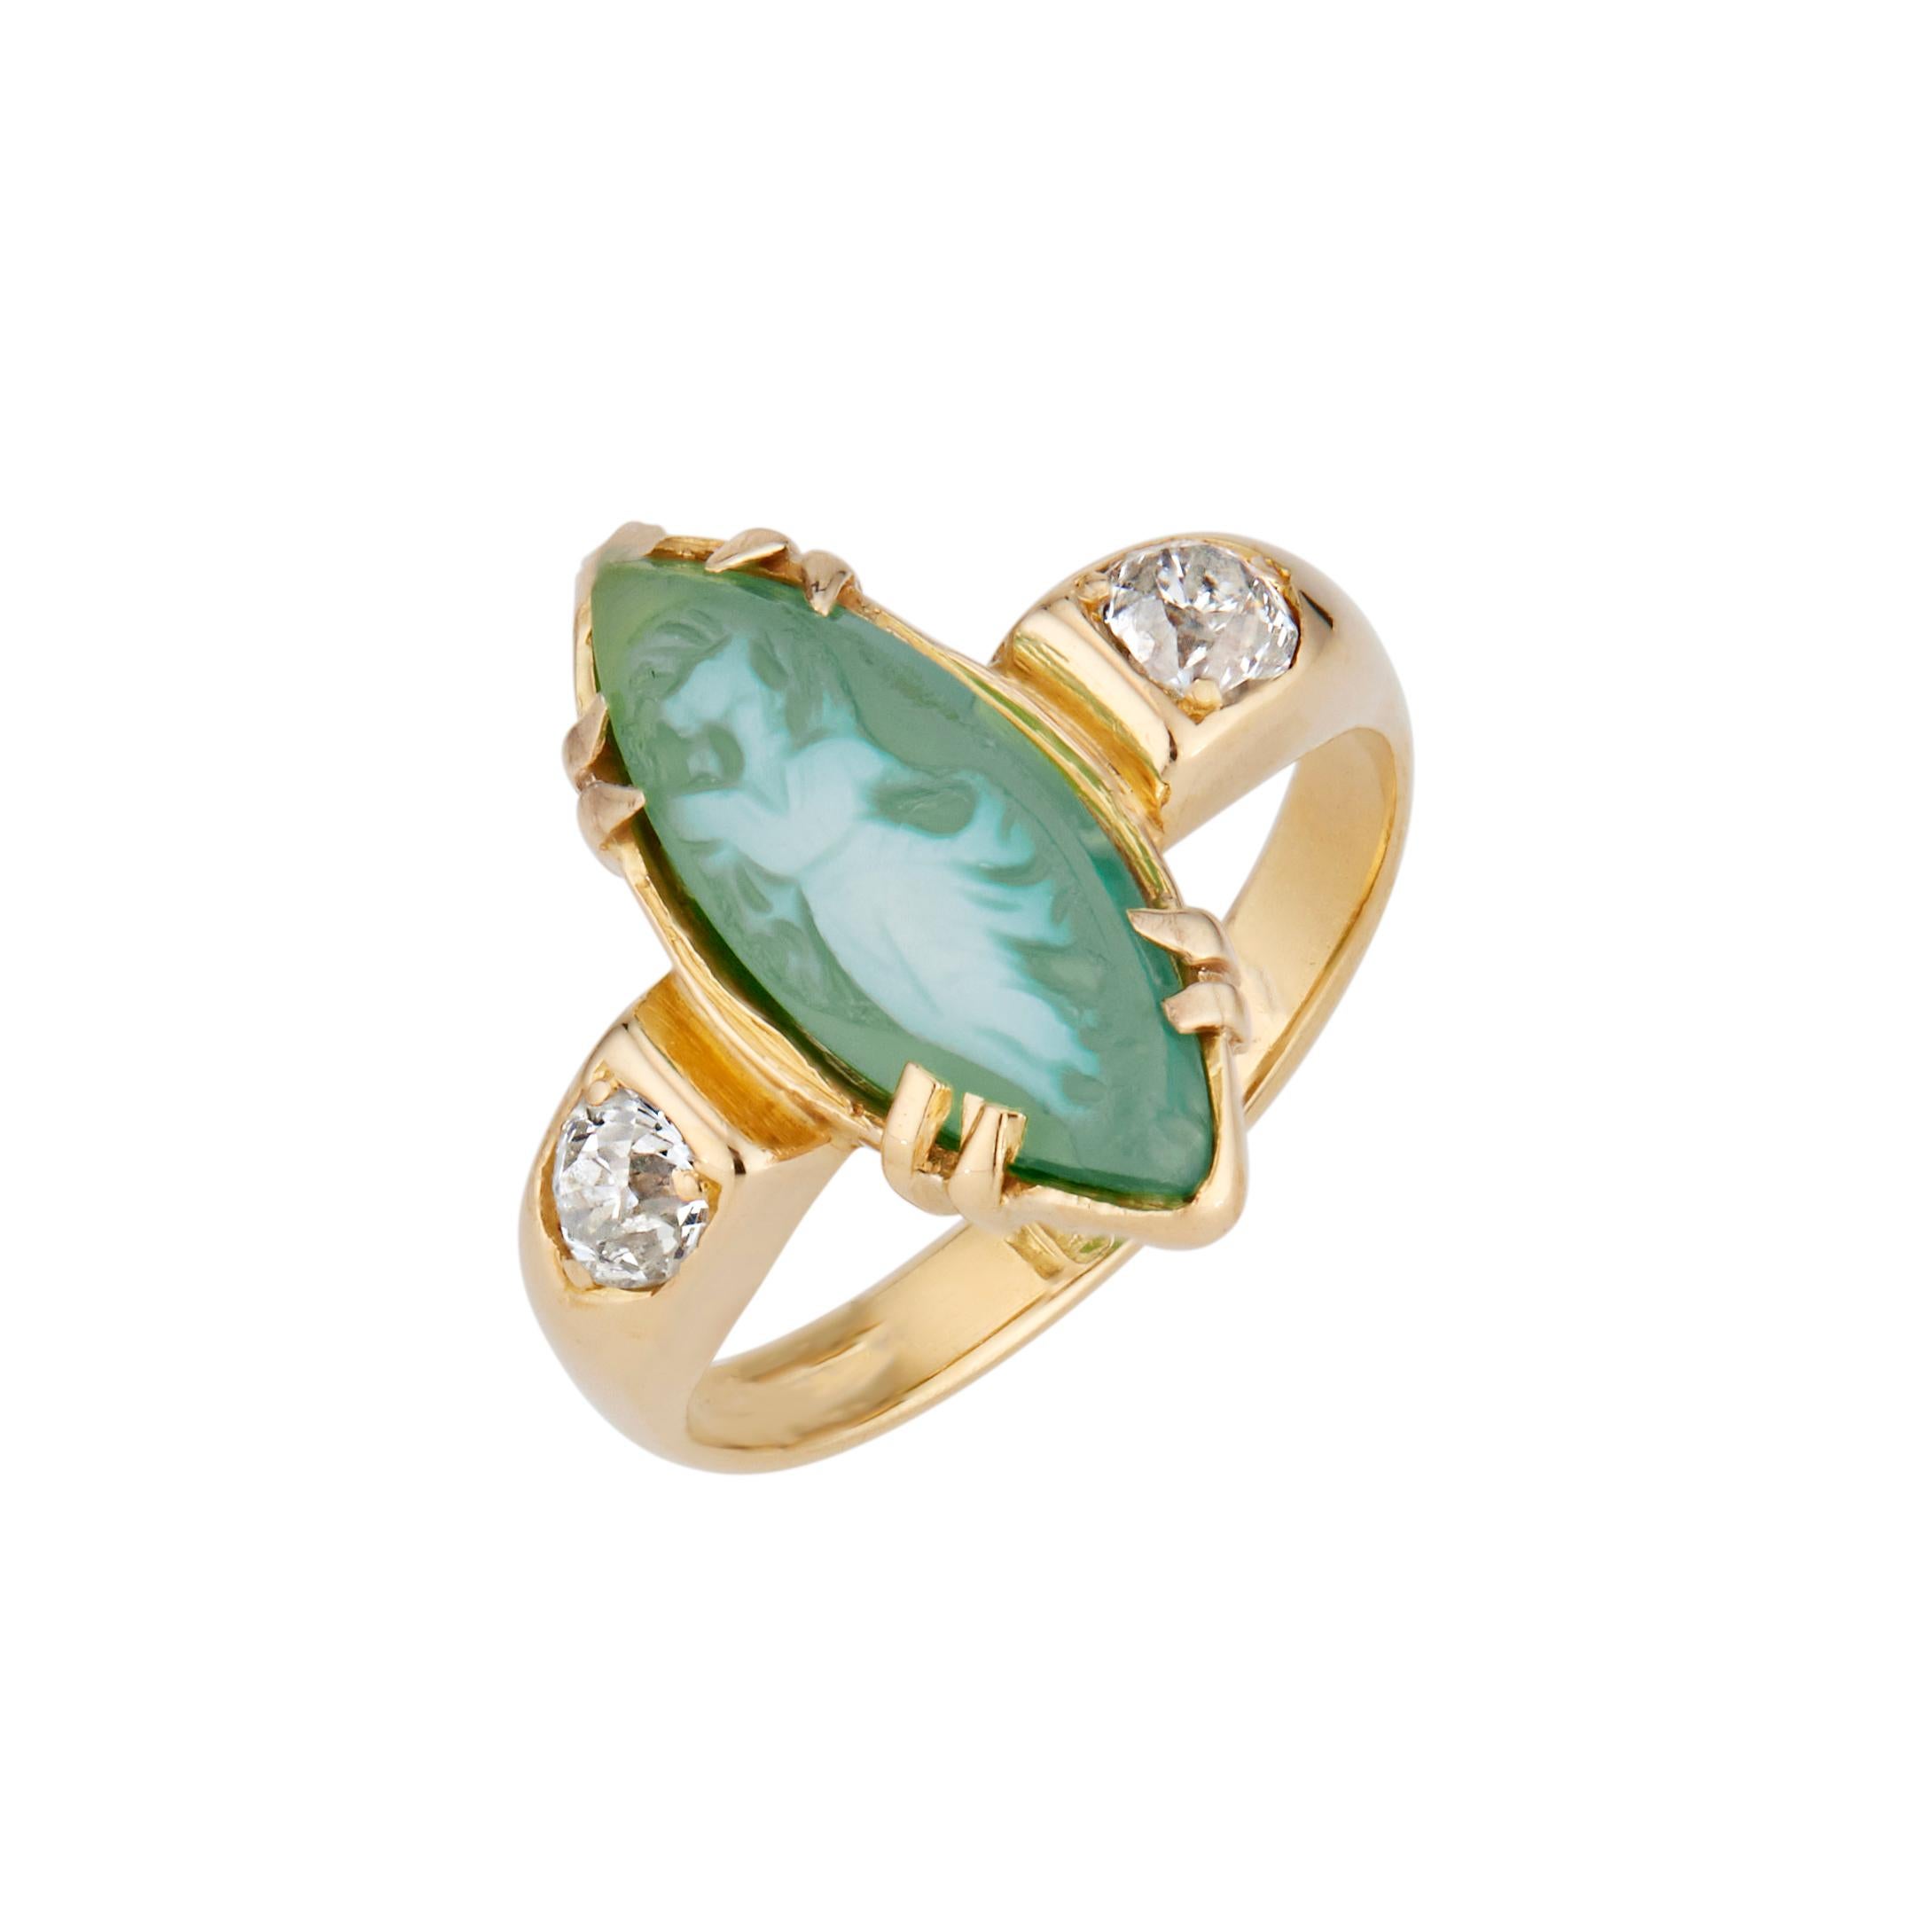 Estate 1920's green agate and diamond ring. Green female form cameo marquise agate center stone with 2 old European cut side diamonds in a 18k yellow gold setting. 

1 marquise shape greenish white agate cameo, 15mm x 5.8mm
2 Old European cut